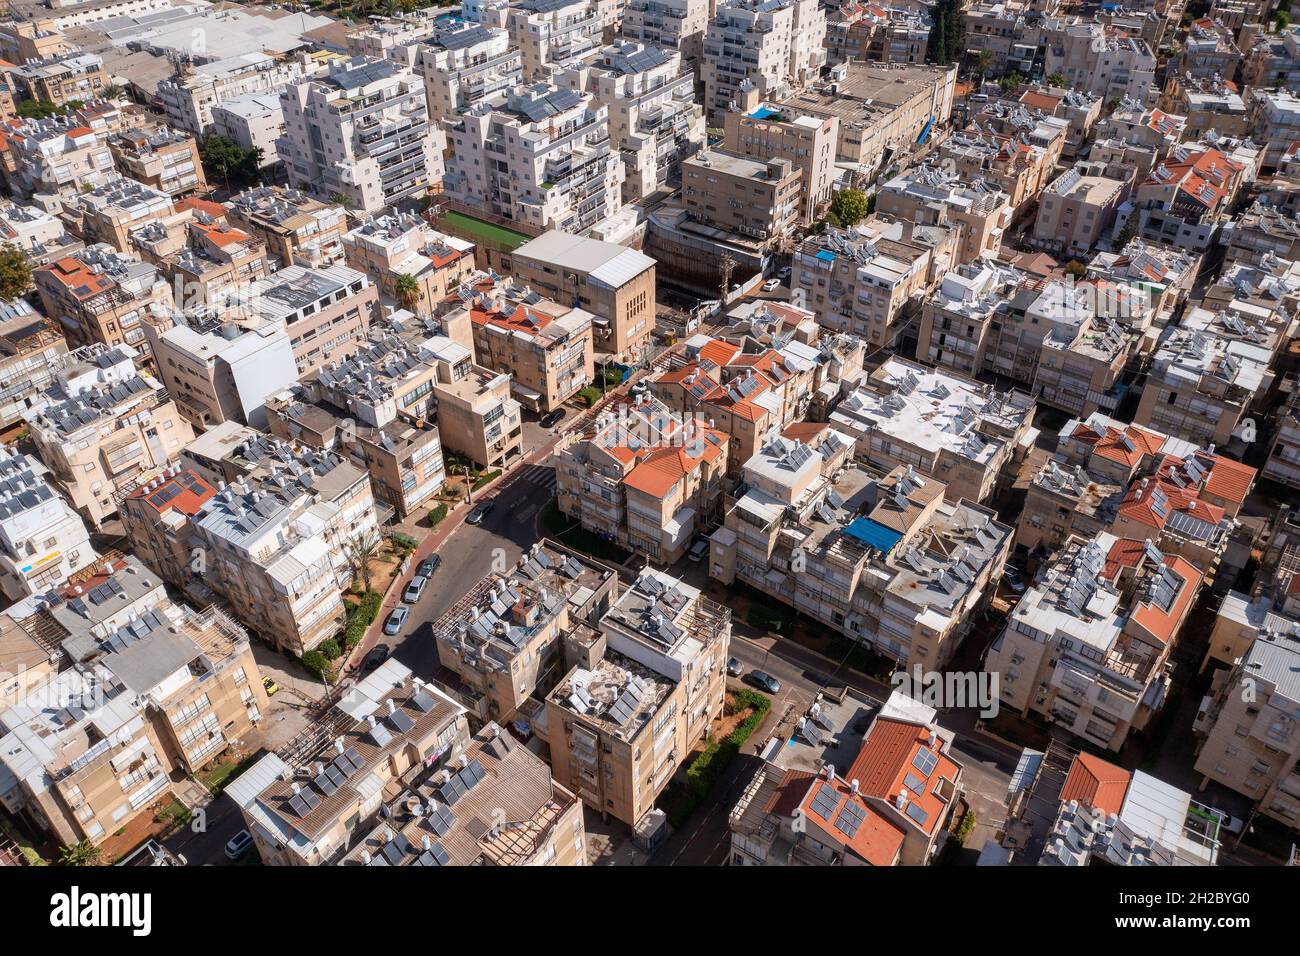 Bnei Brak city rooftops, Low altitude aerial view. Stock Photo